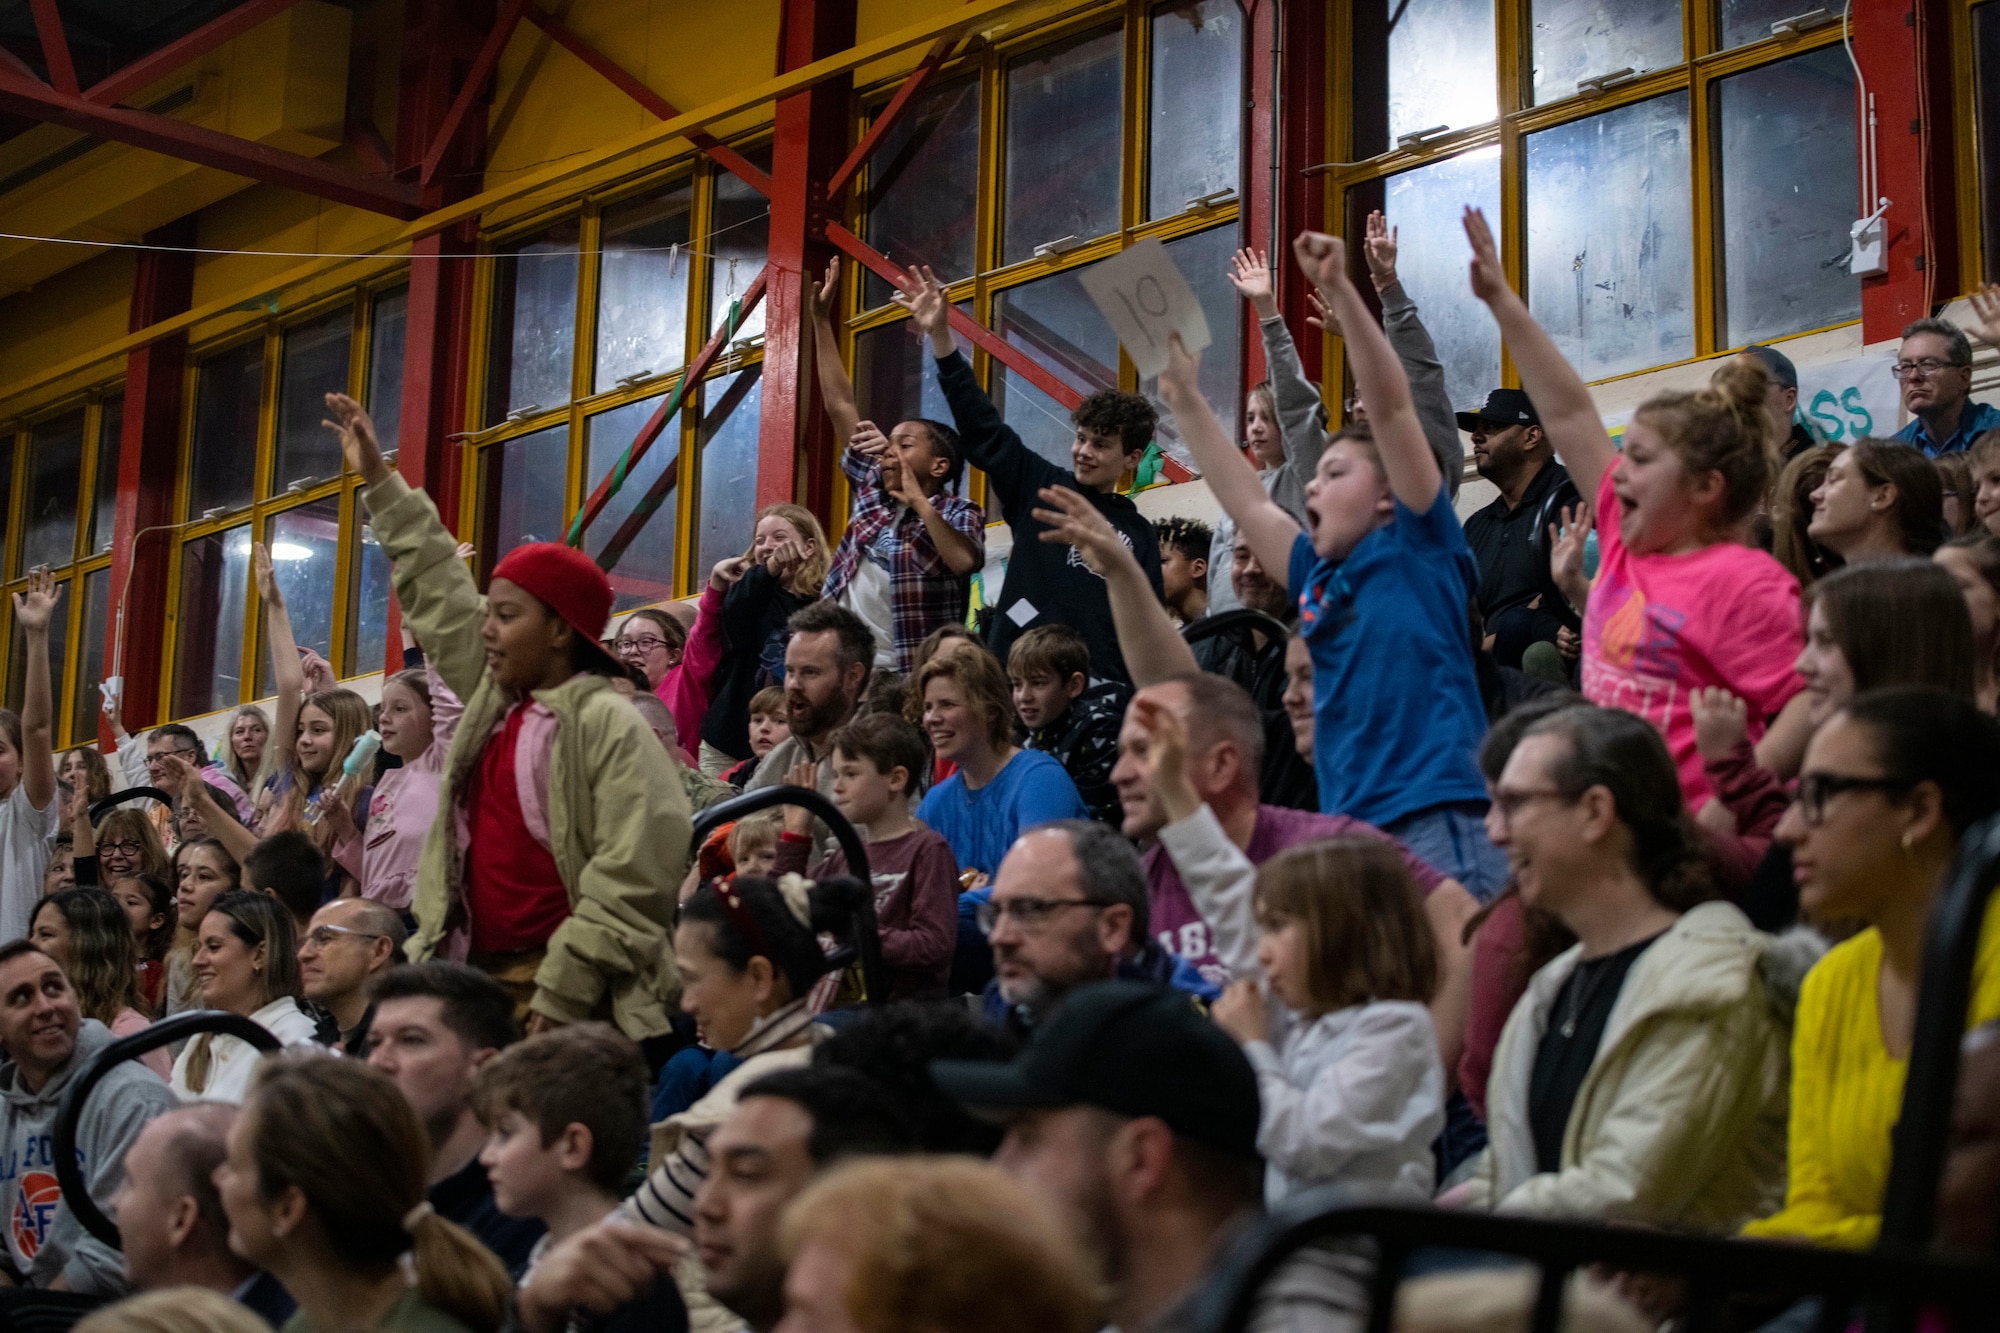 The crowd cheers during a performance by the Harlem Globetrotters at RAF Alconbury